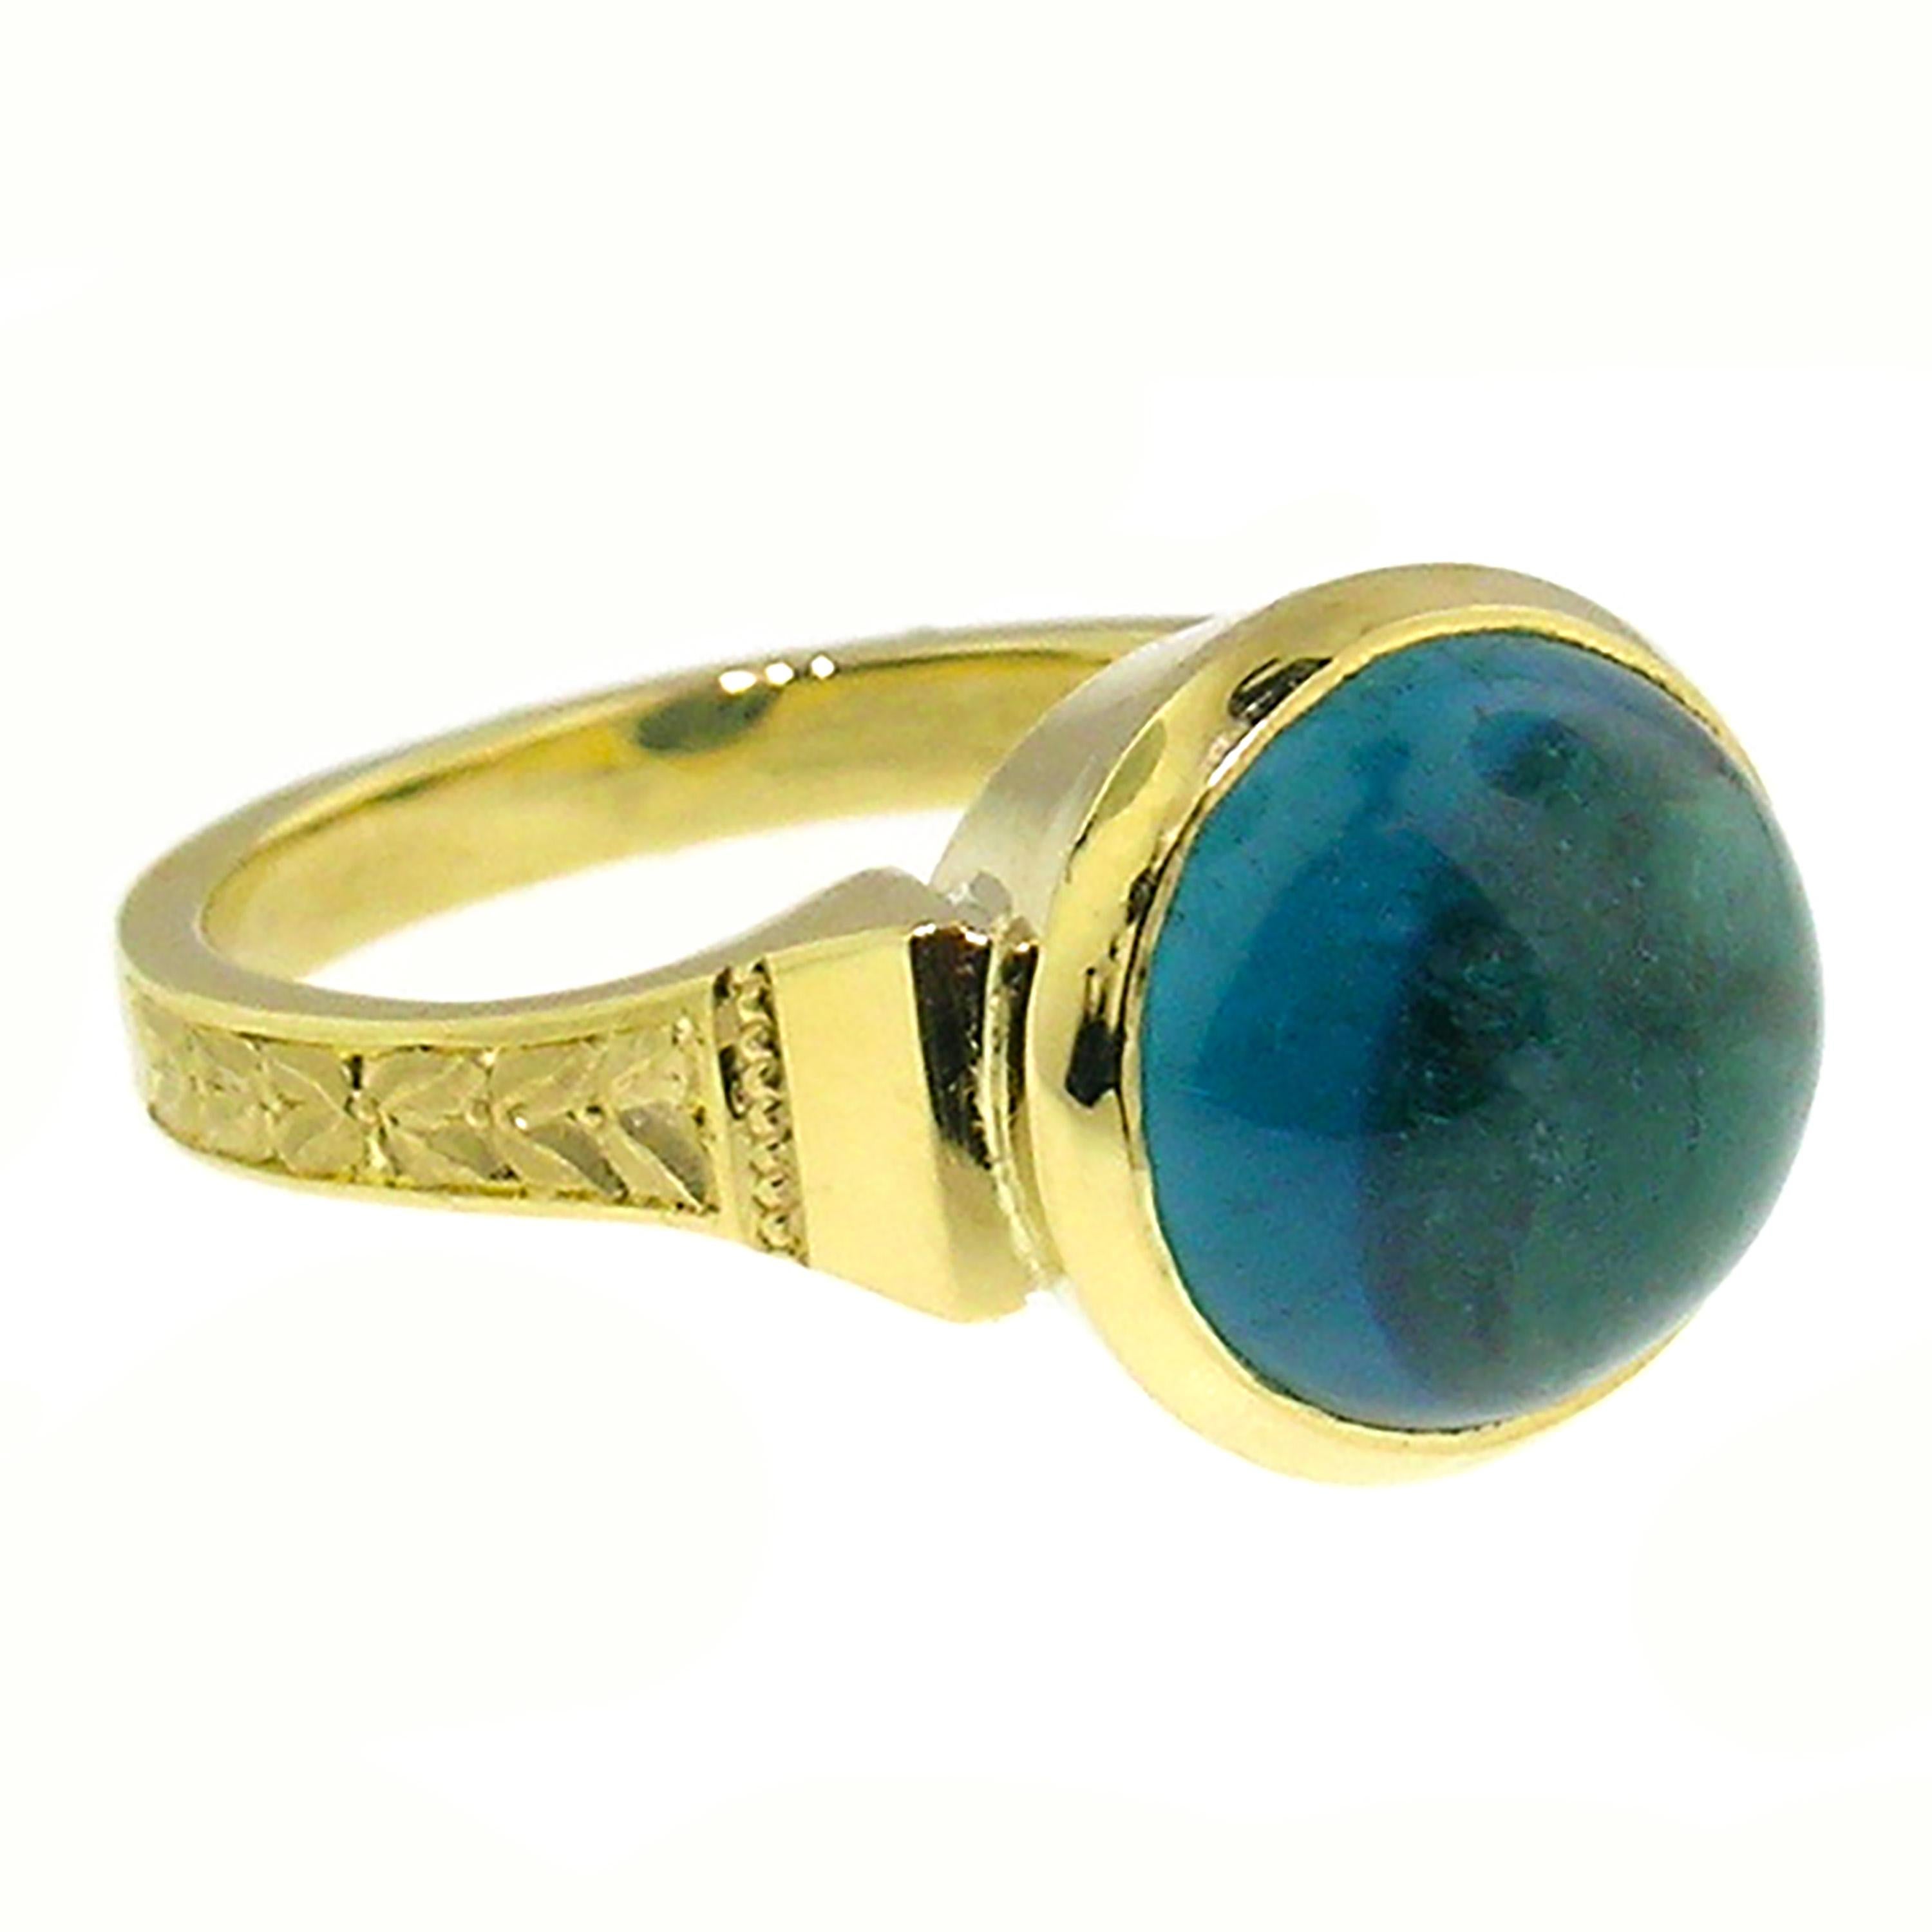 Cabochon 4.64ct Blue Tourmaline Indicolite 18kt Cassandra Ring by Cynthia Scott Jewelry For Sale